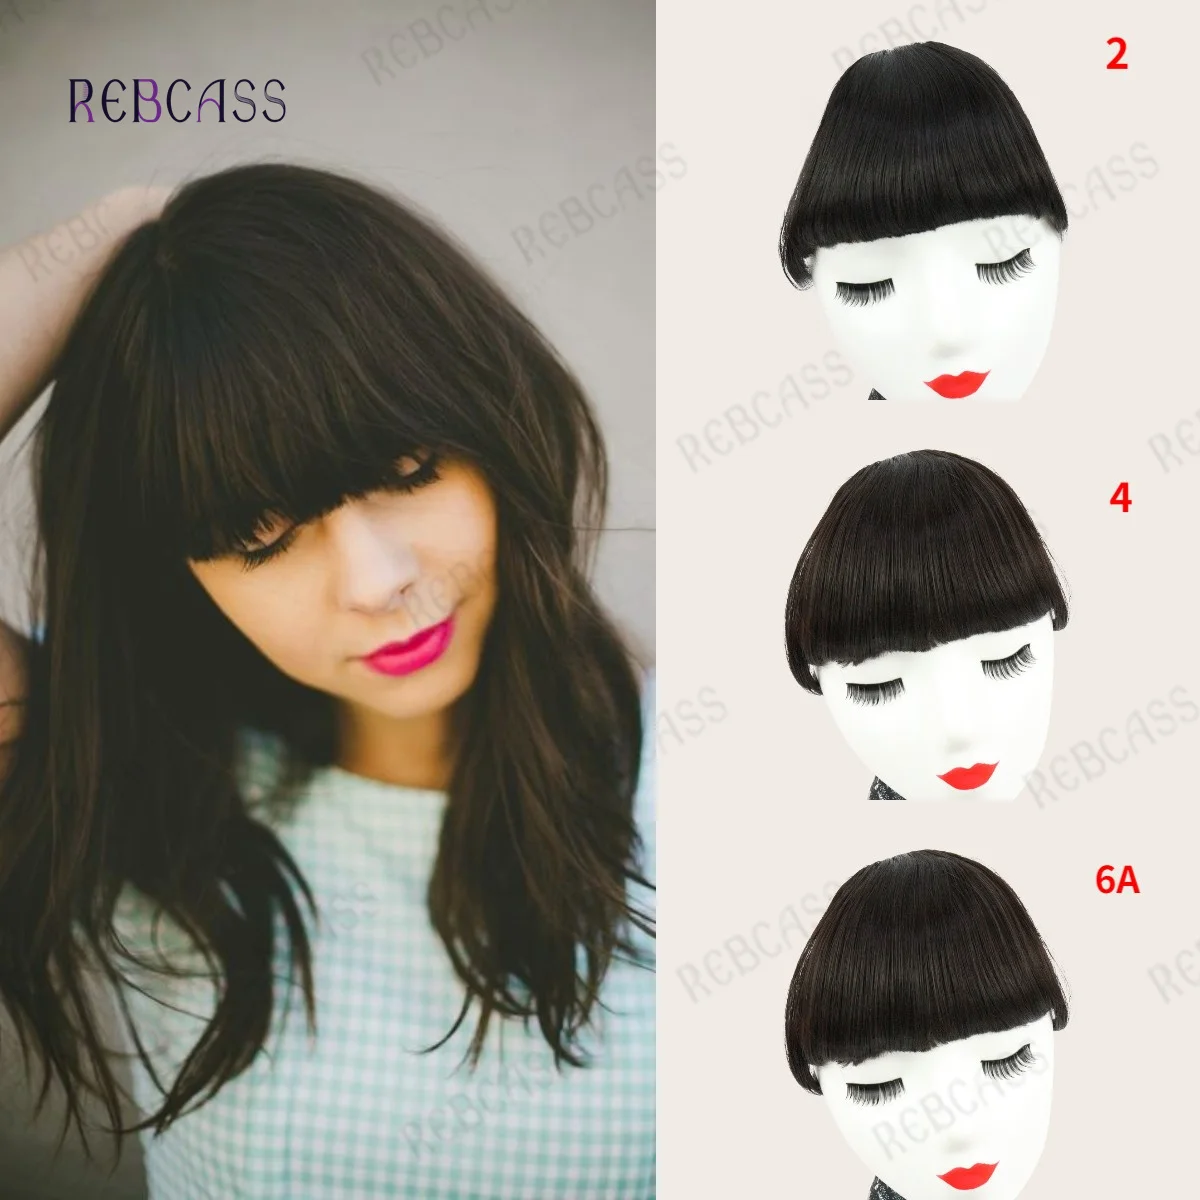 

Rebcass Synthetic Neat Front Fringe Clip In Hair Bangs Hair Extensions Sweeping Side Blunt Bang Natural Black Brown Hairpieces